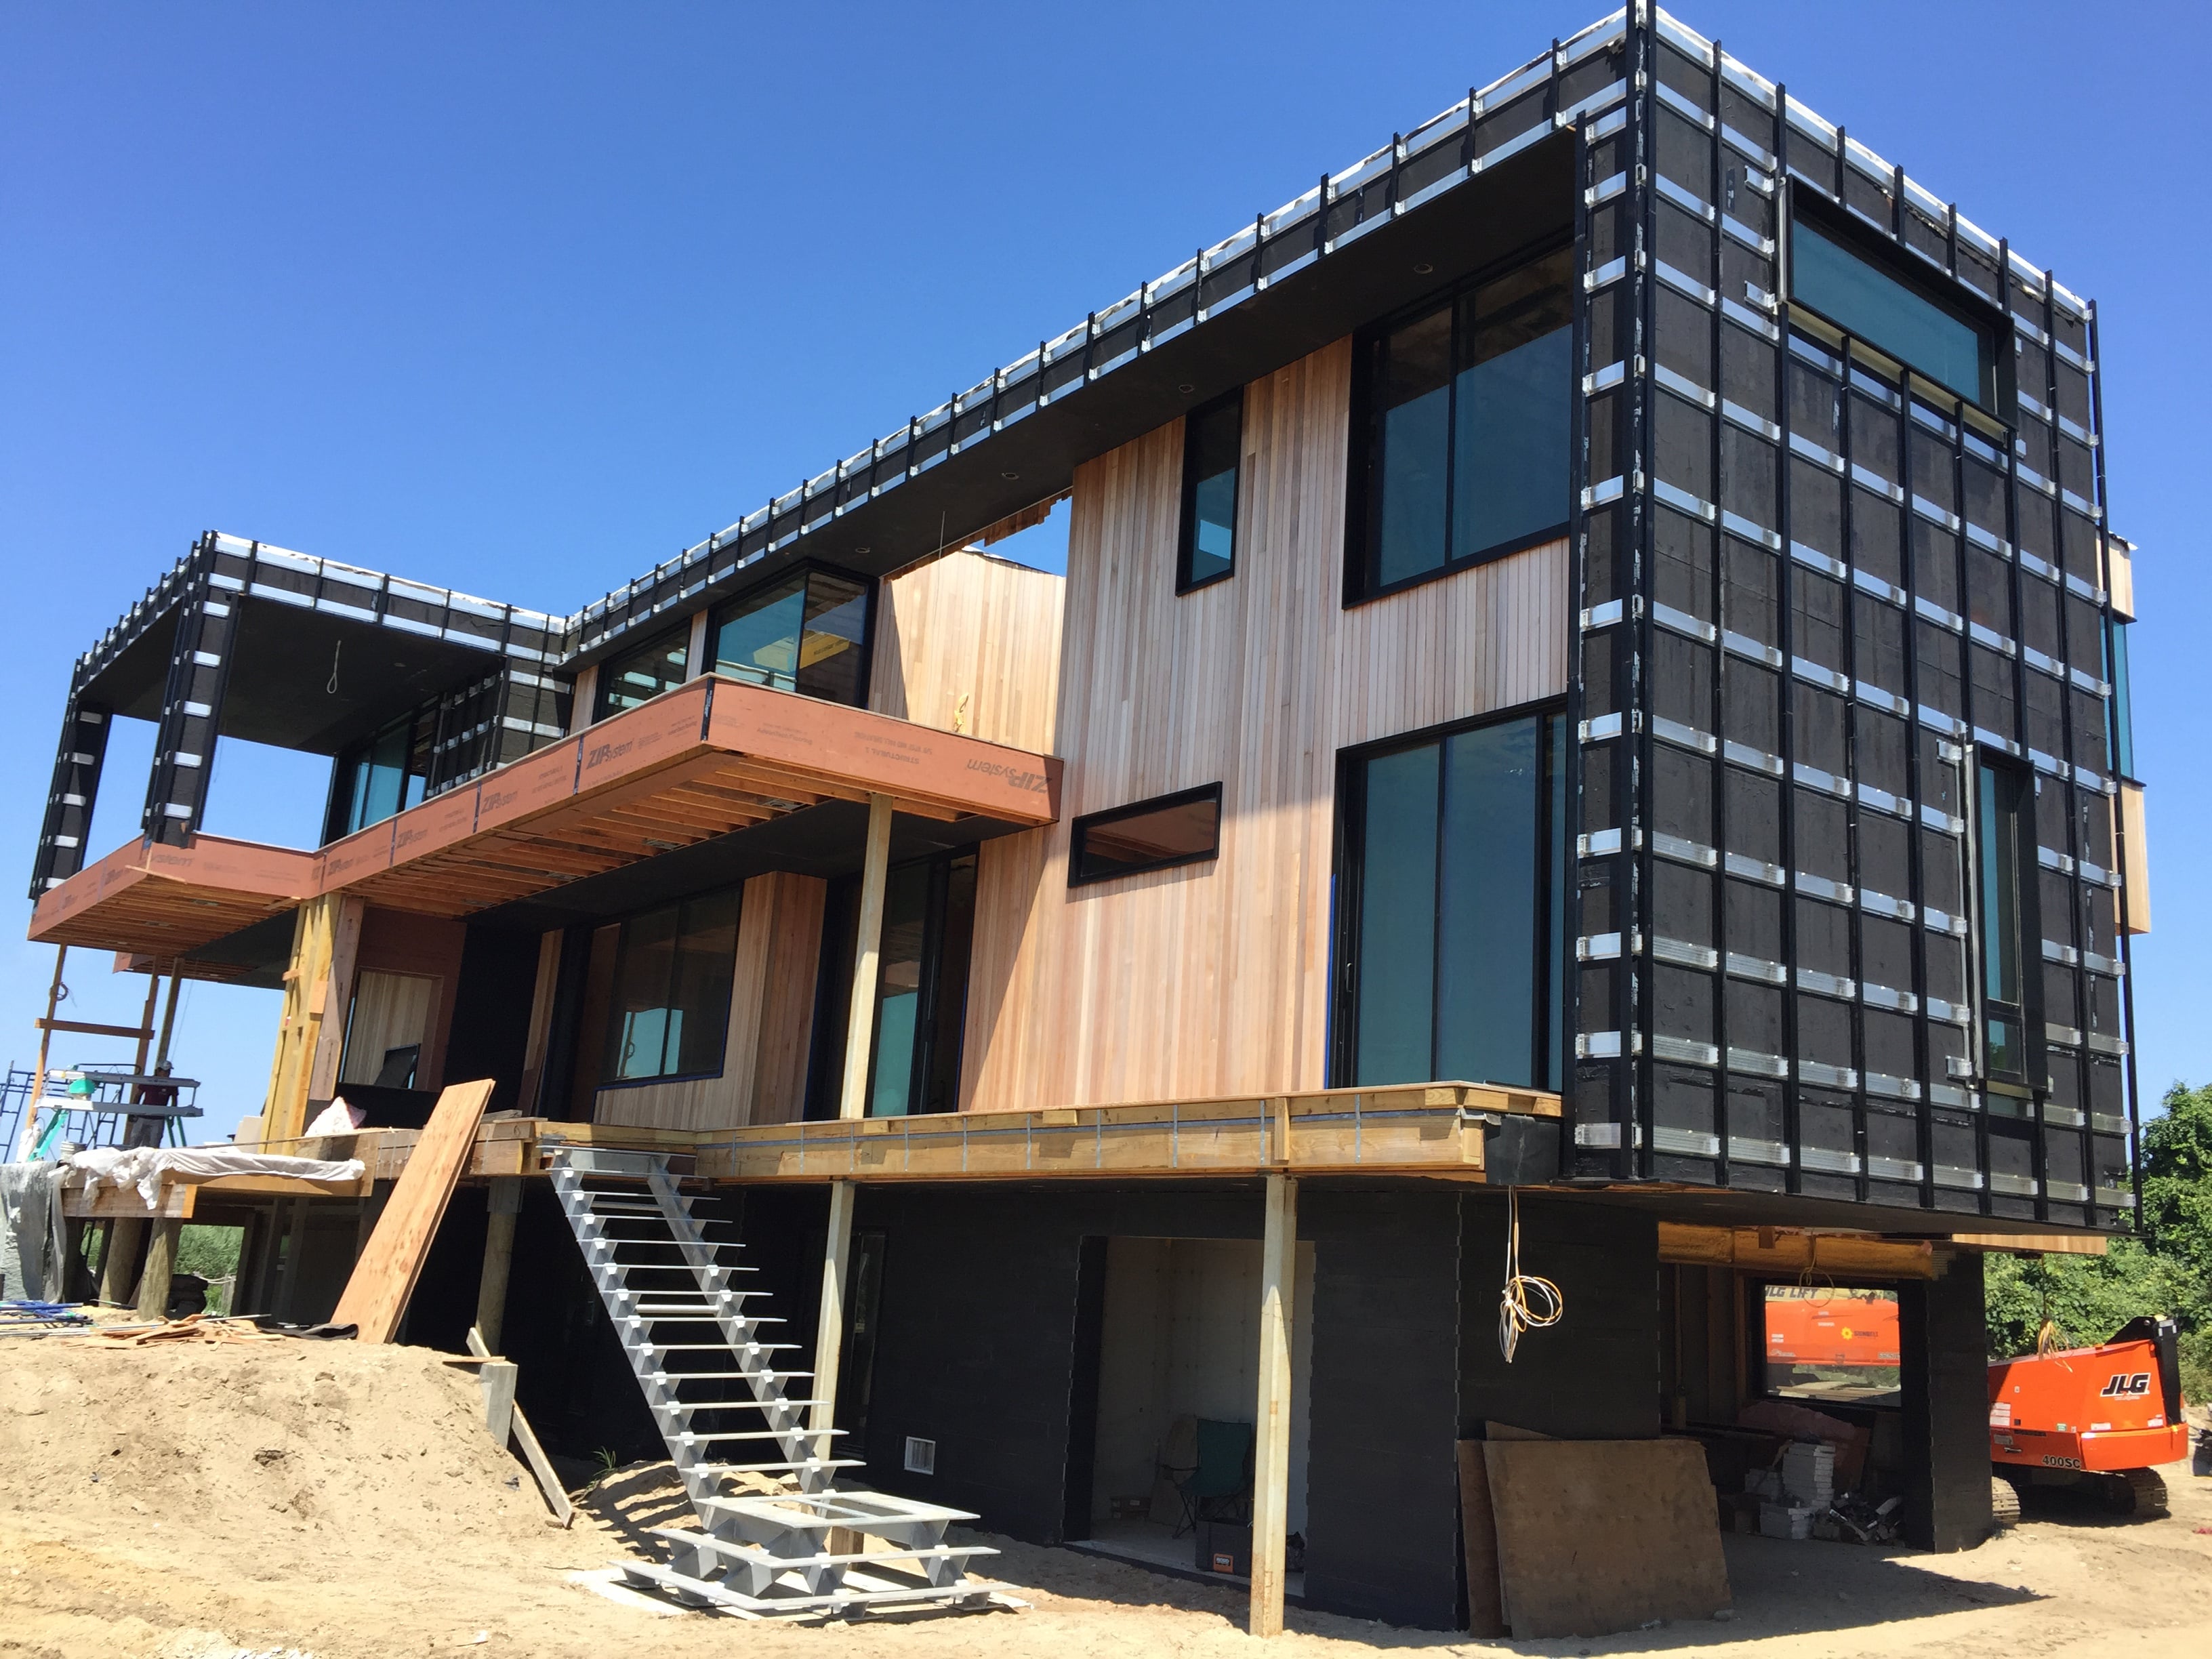 Norstone Ebony Planc on the lower level exterior facade of a residential project in the Hamptons